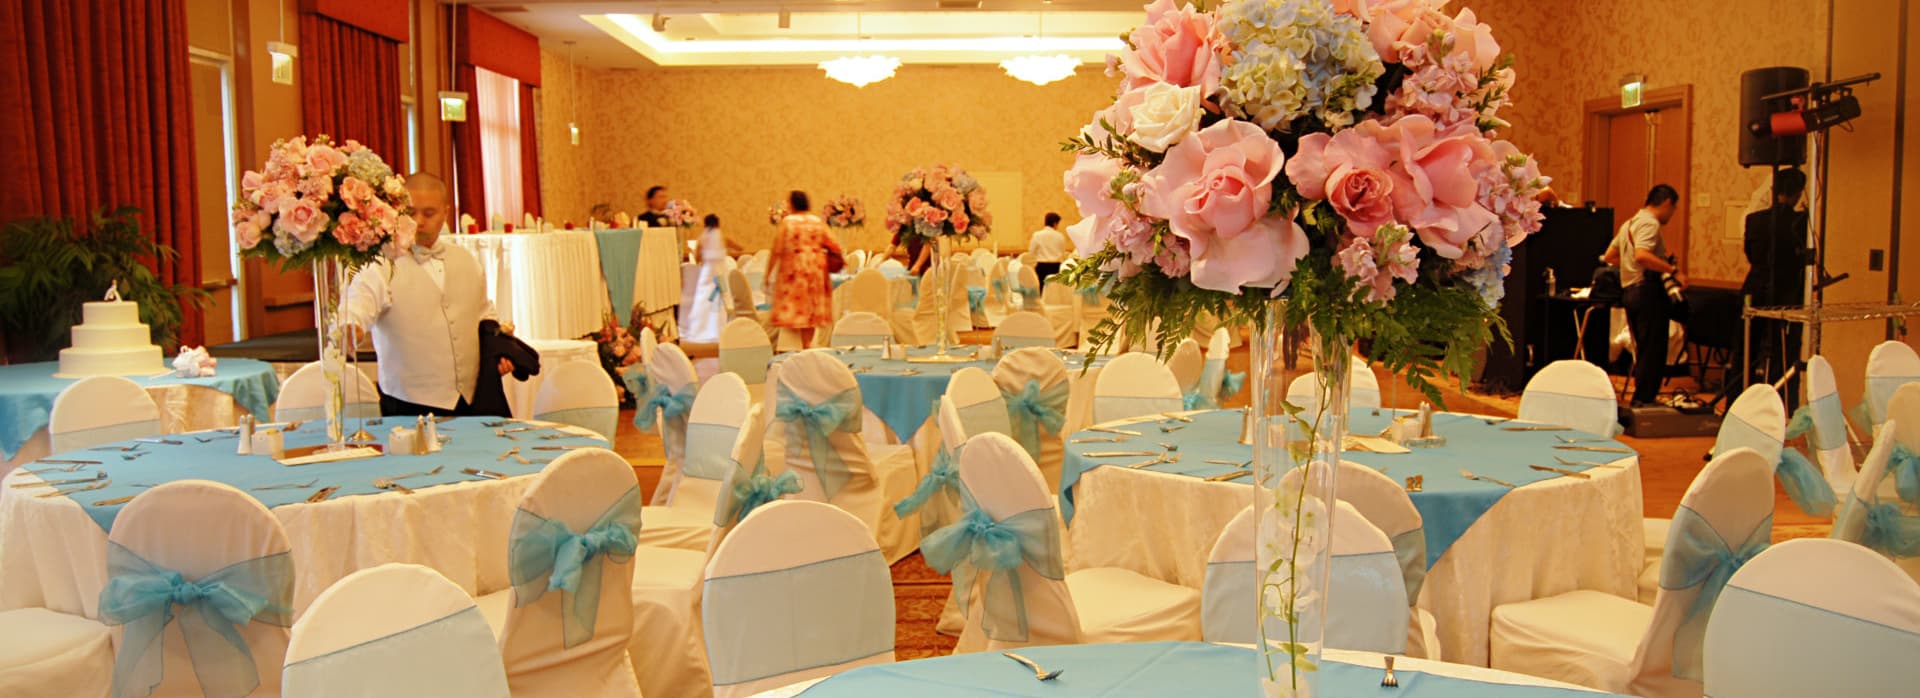 reception area with blue table cloth and different kinds of flowers